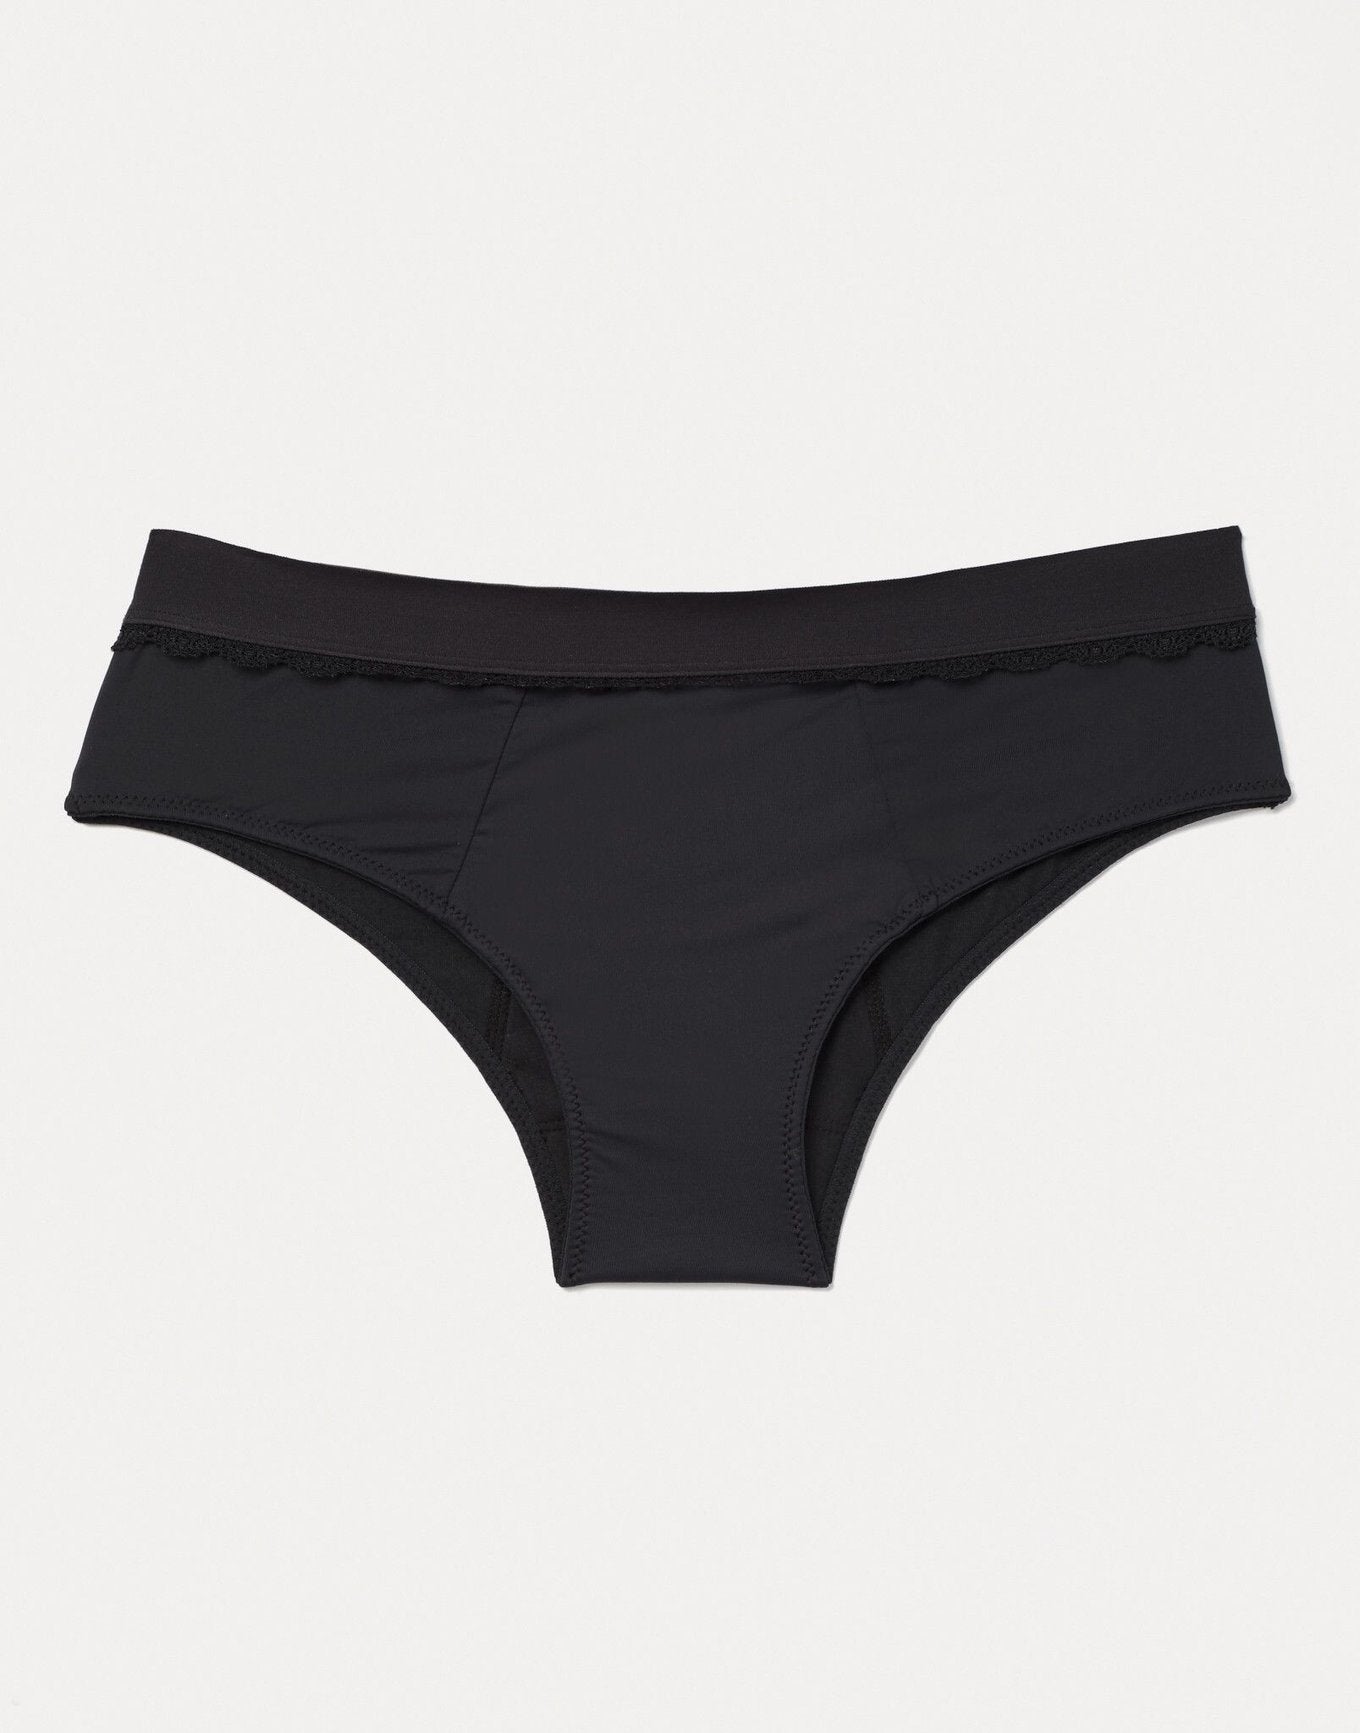 Joyja Cindy period-proof panty in color Jet Black and shape cheeky